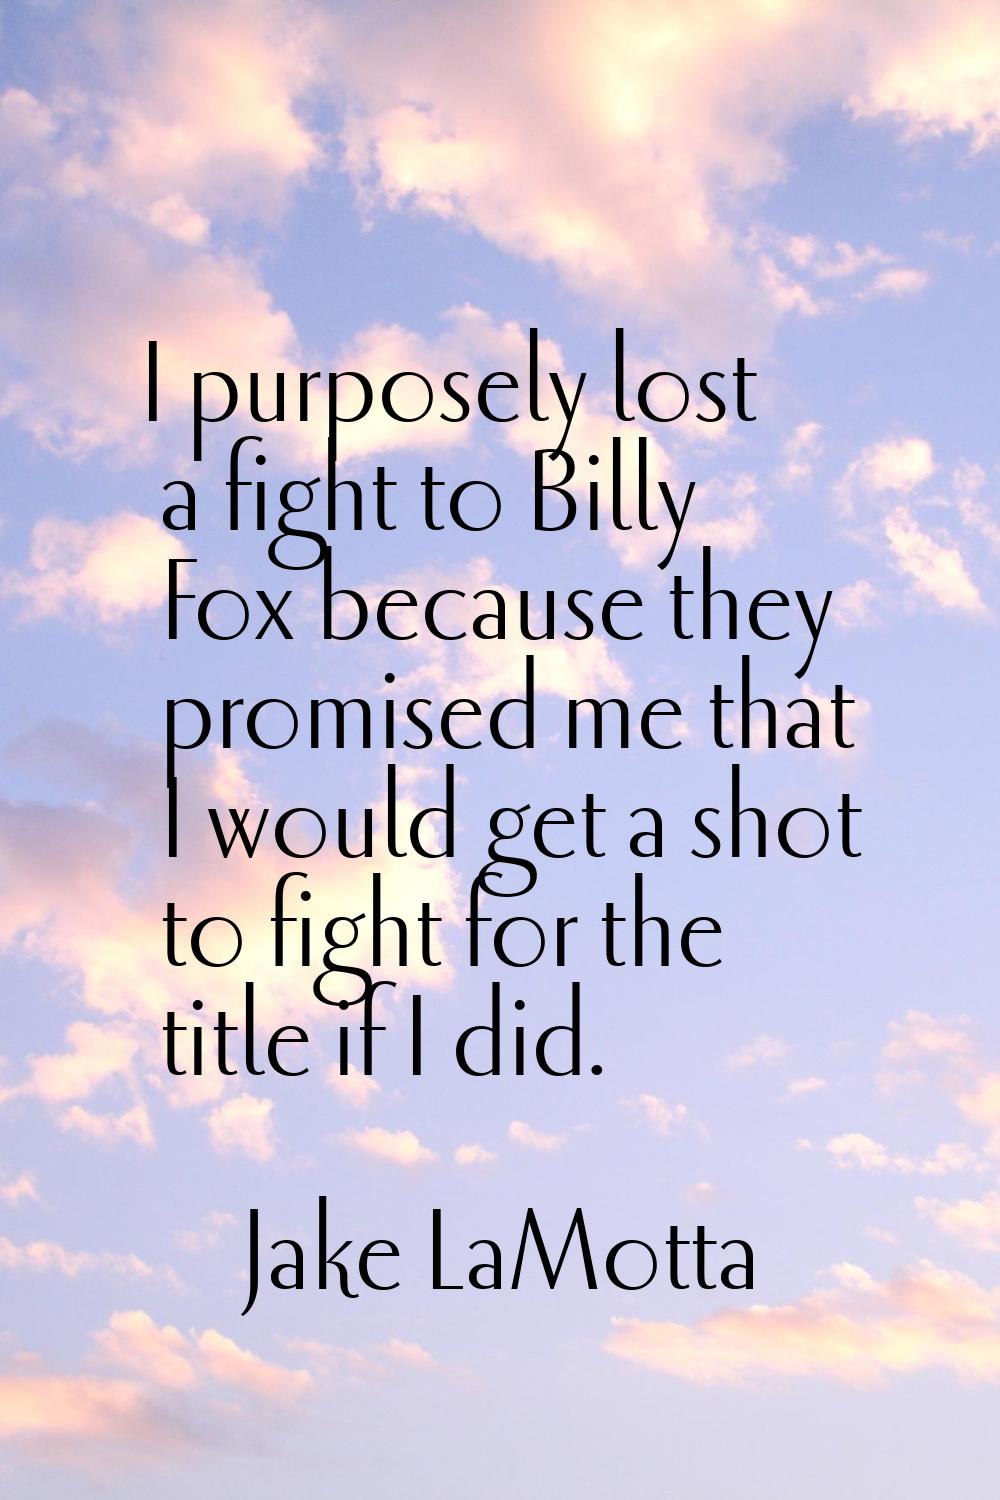 I purposely lost a fight to Billy Fox because they promised me that I would get a shot to fight for